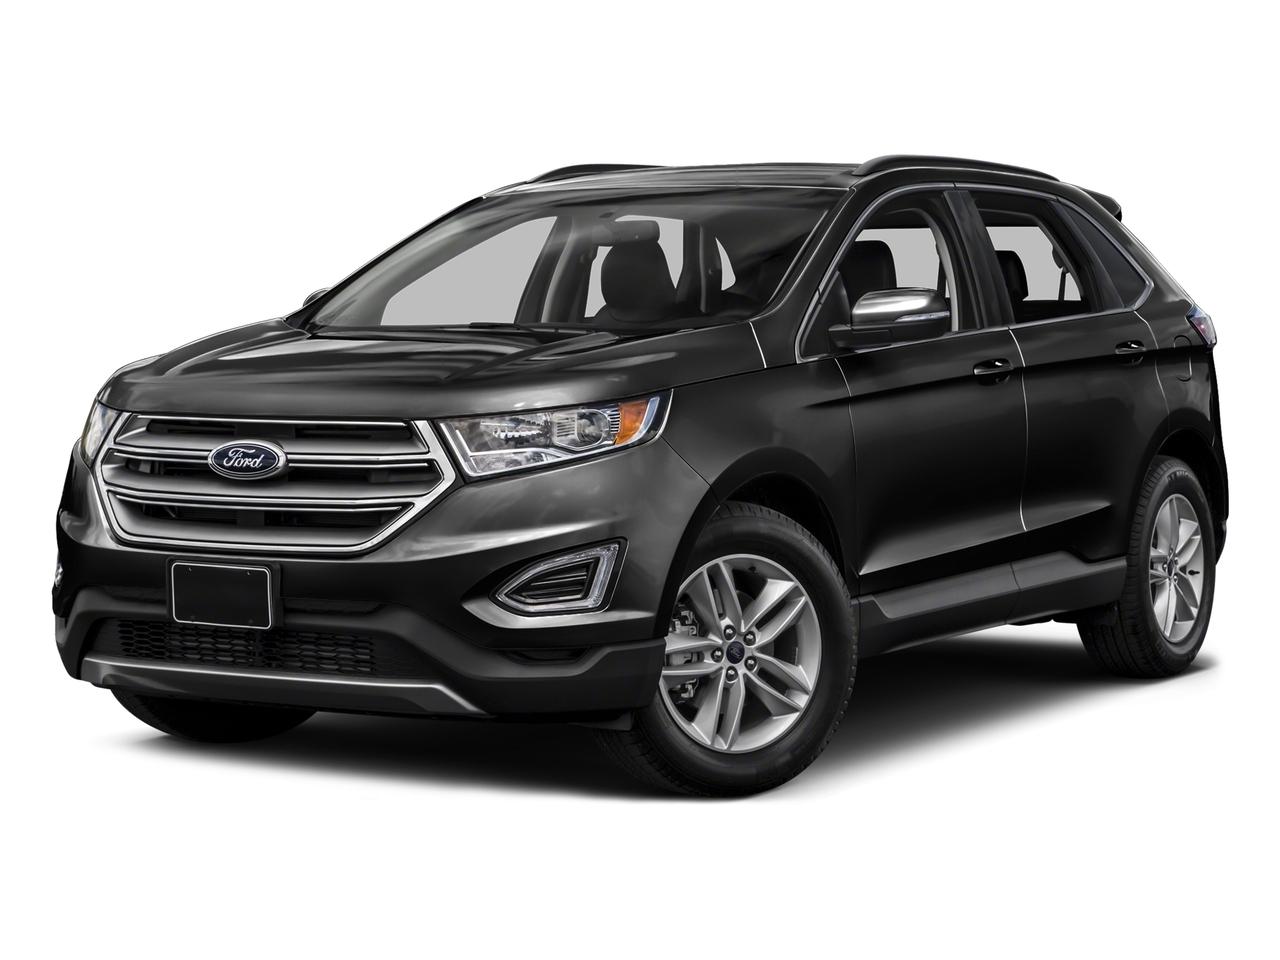 2015 Ford Edge Vehicle Photo in Weatherford, TX 76087